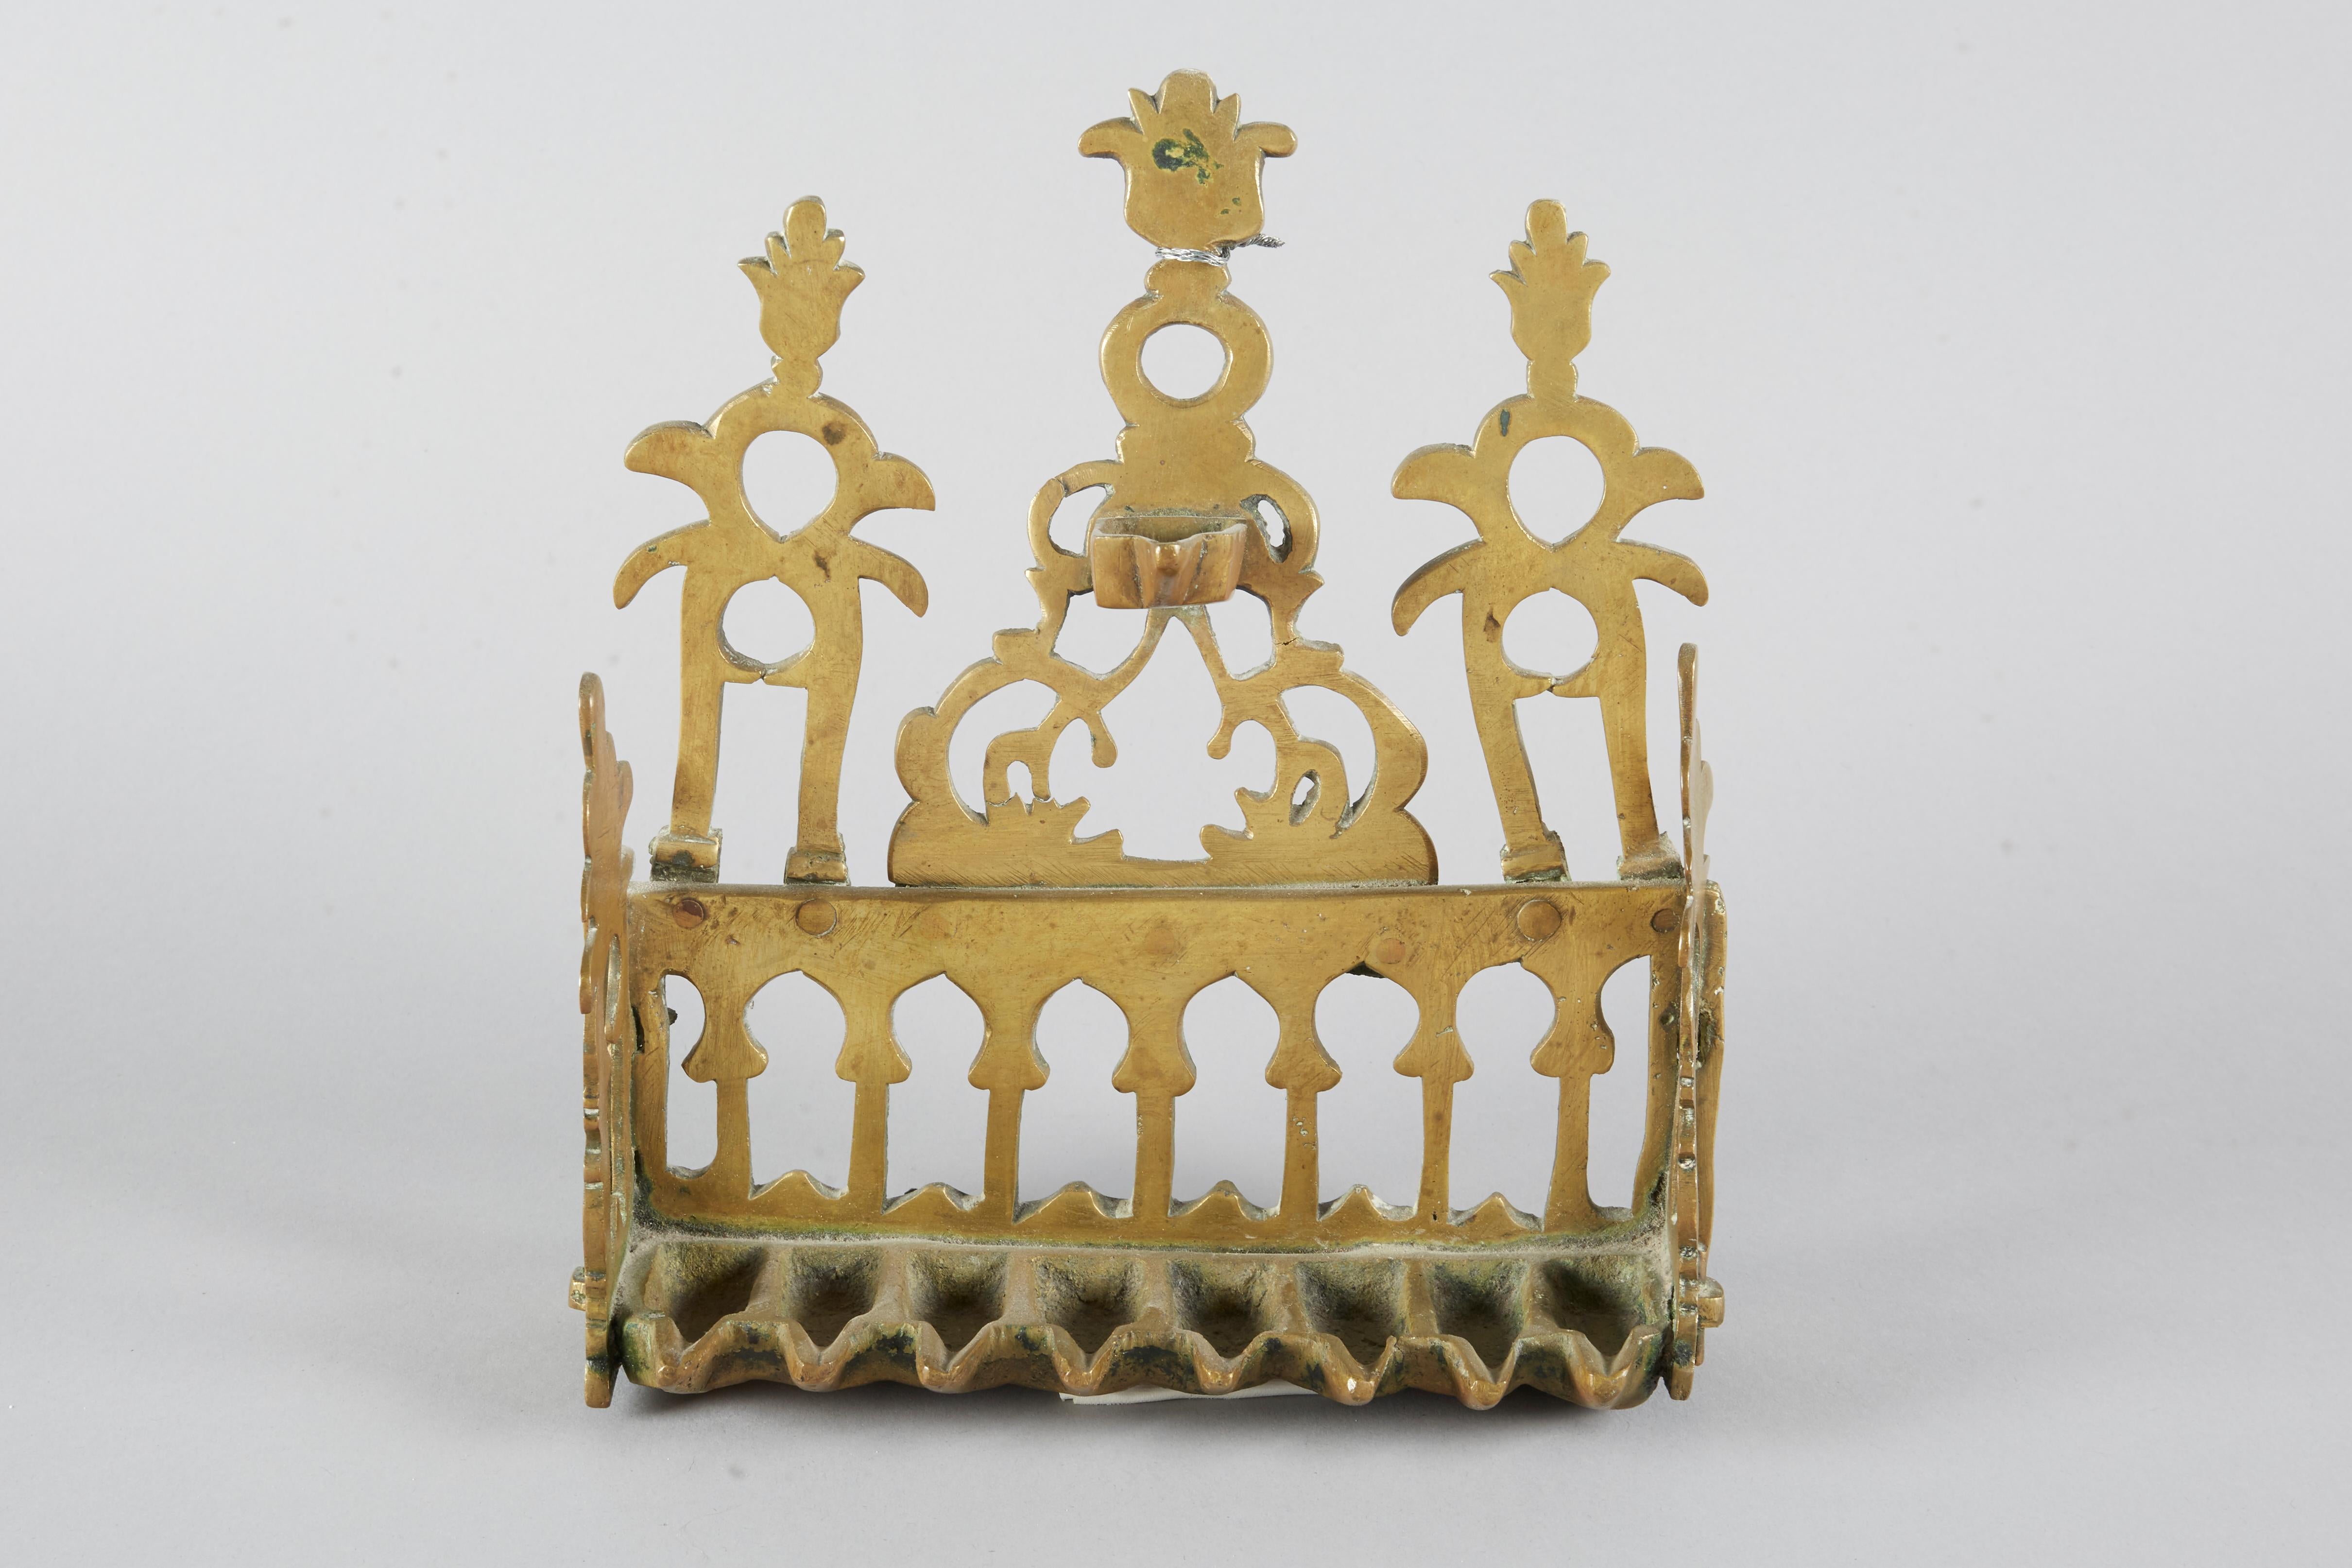 The hanging back-walled Hanukkah Lamp is made of brass and consists of a row of oil containers, a back and sides wall, and a hanger. A row of eight rectangular spouted oil containers is attached to the back and side walls. The pointed arch openwork